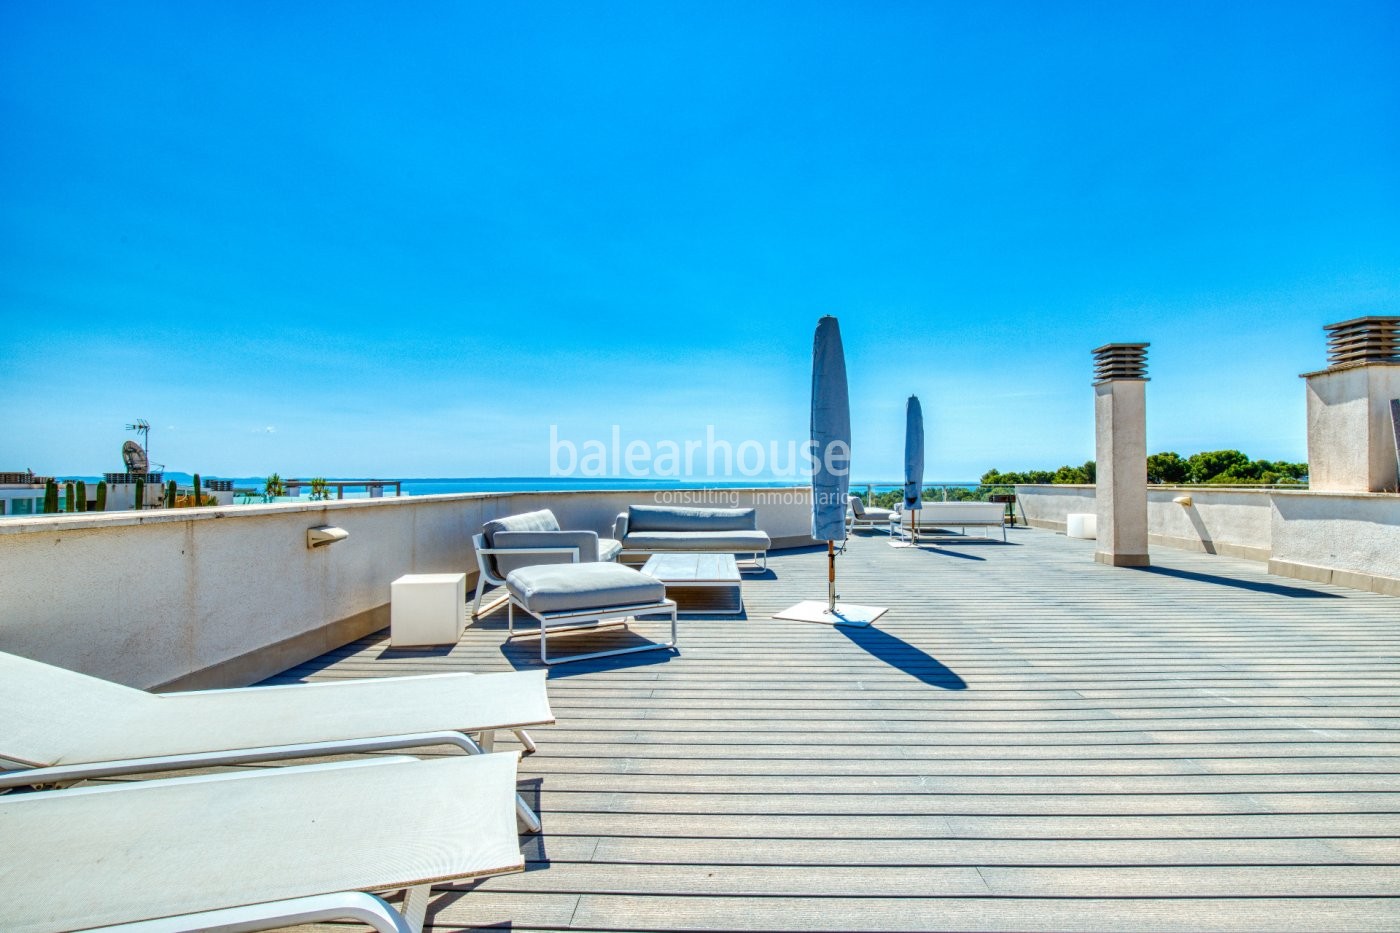 Spectacular penthouse with rooftop terrace in luxurious residential complex.